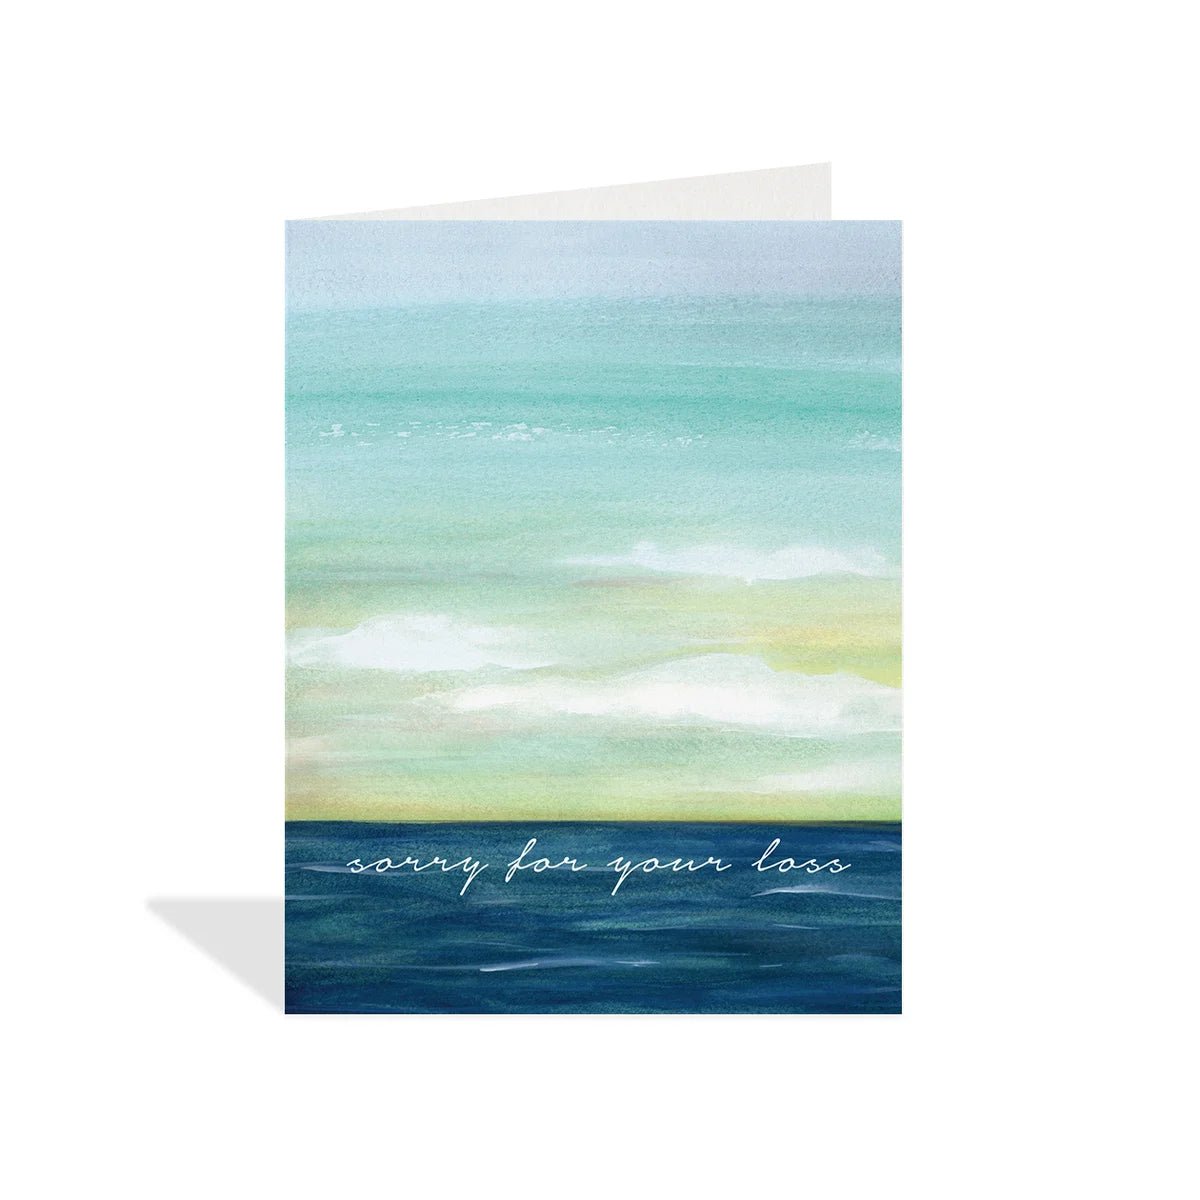 Sorry For Your Loss - Greeting Card - Sympathy